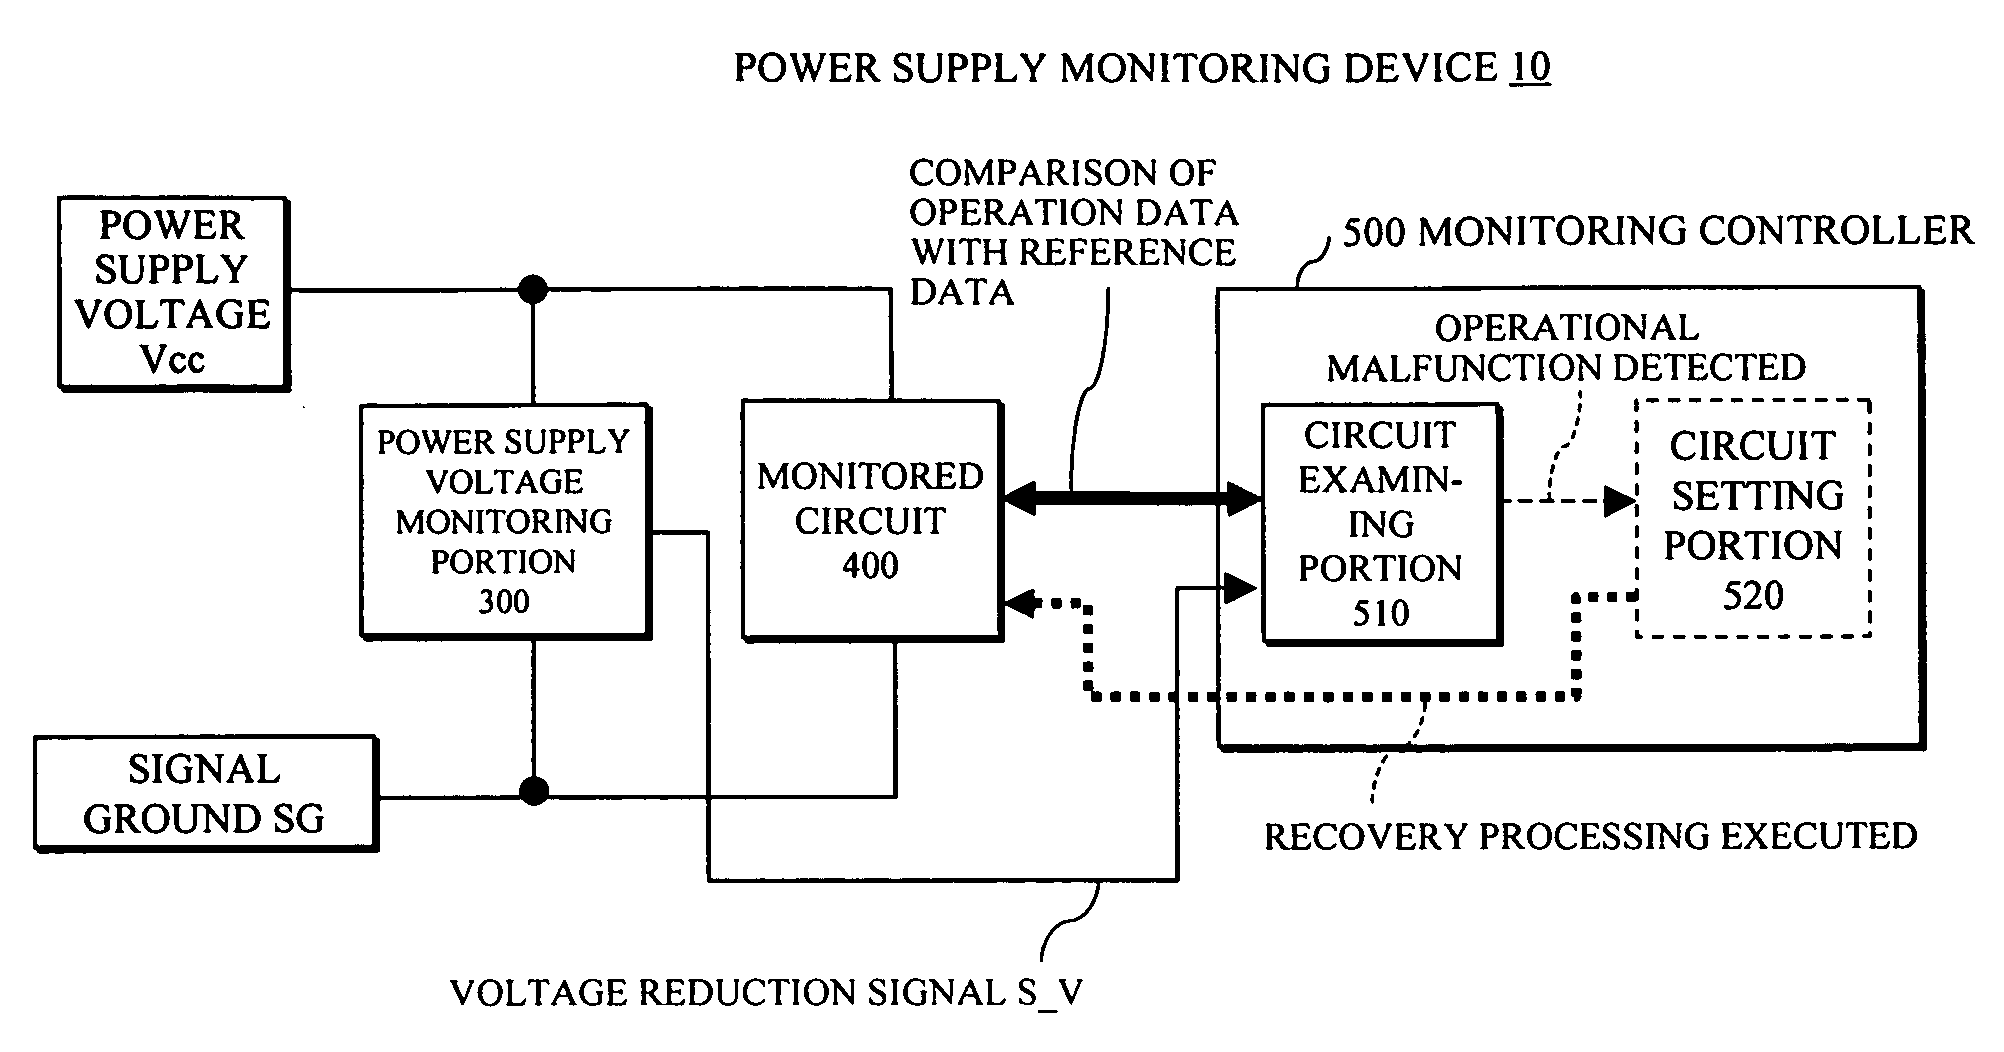 Power supply monitoring device